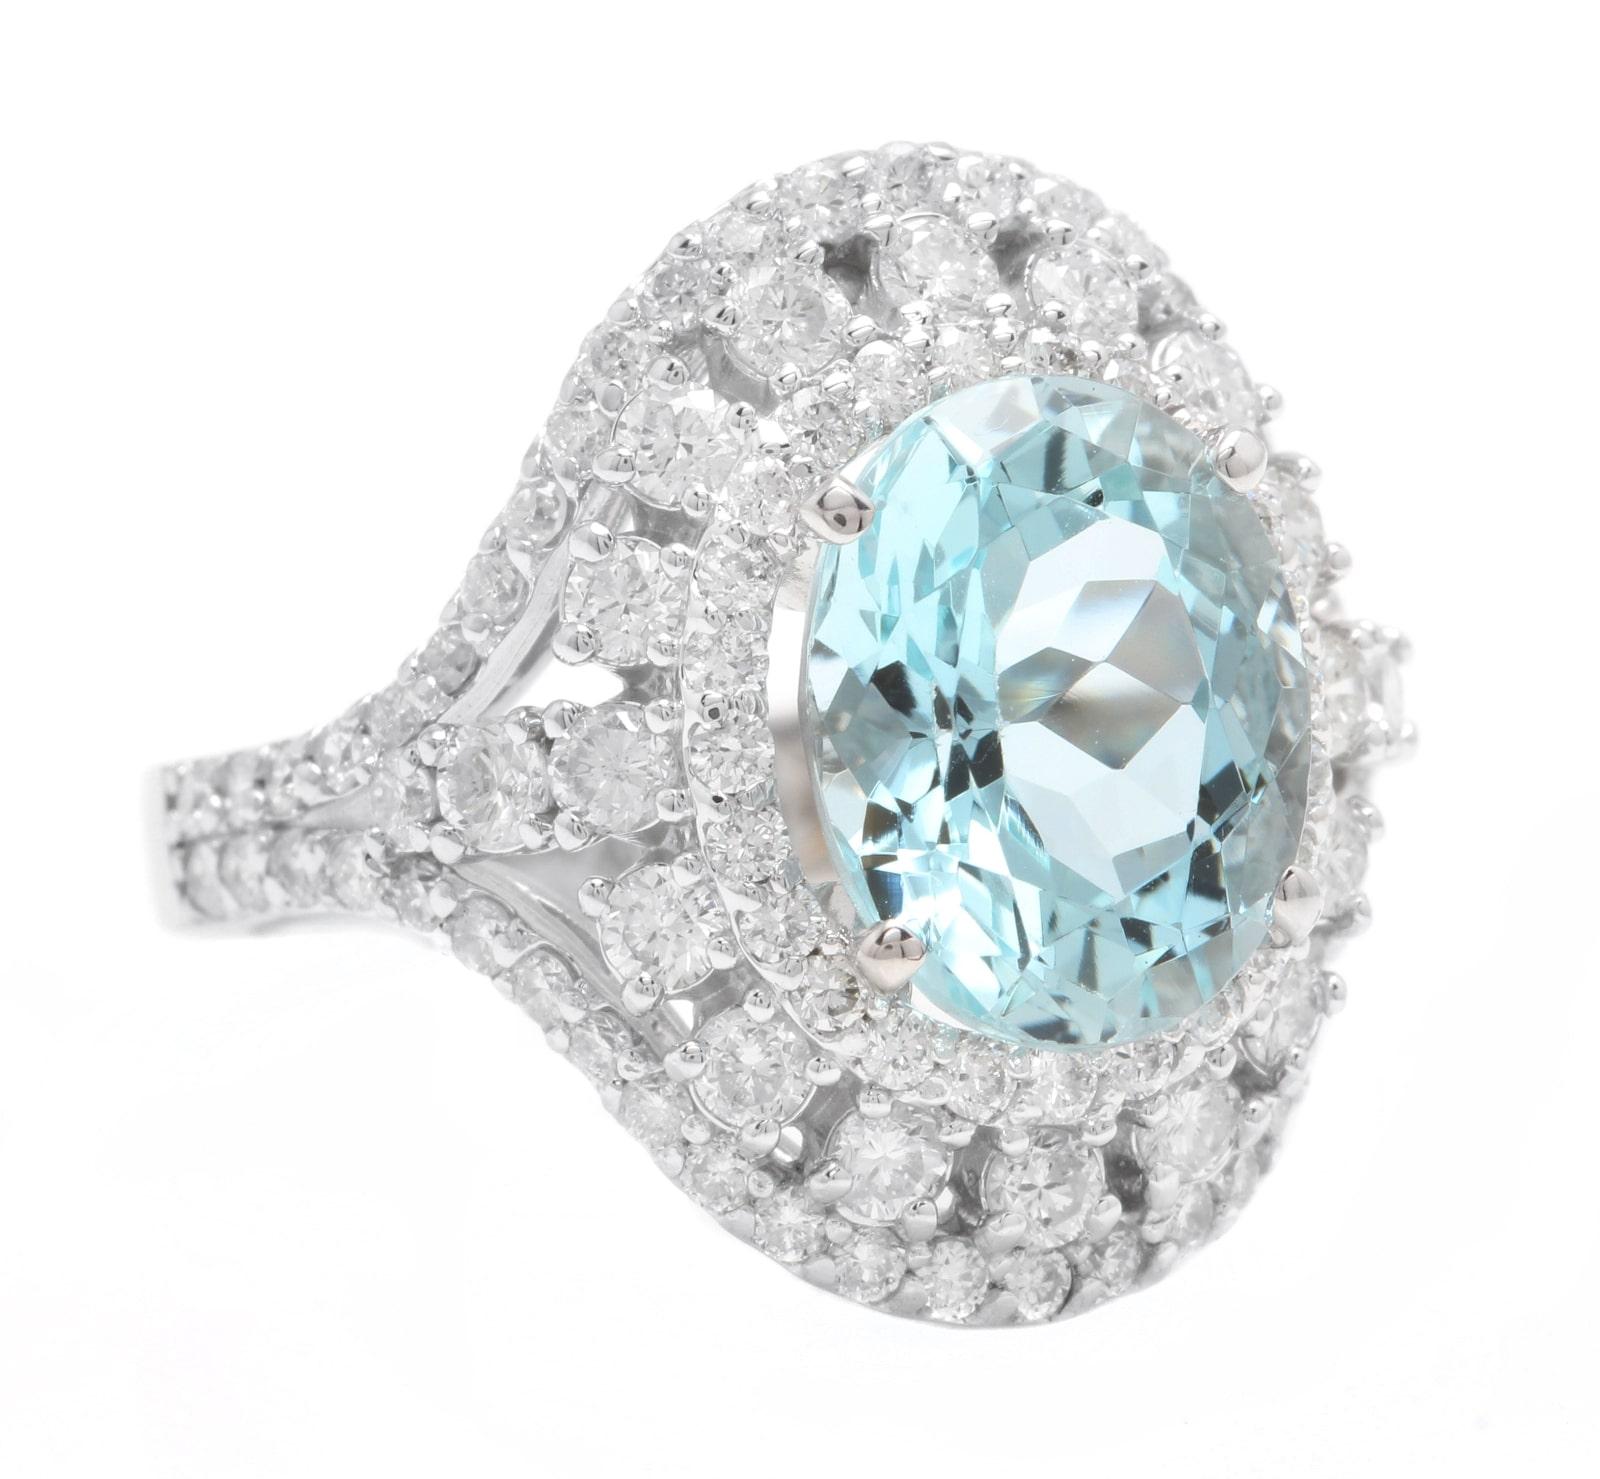 6.00 Carats Natural Aquamarine and Diamond 14K Solid White Gold Ring

Total Natural Oval Cut Aquamarine Weights: 4.00 Carats

Aquamarine Measures: 11.00 x 9.00mm

Natural Round Diamonds Weight: 2.00 Carats (color G-H / Clarity SI1-SI2)

Ring size: 6